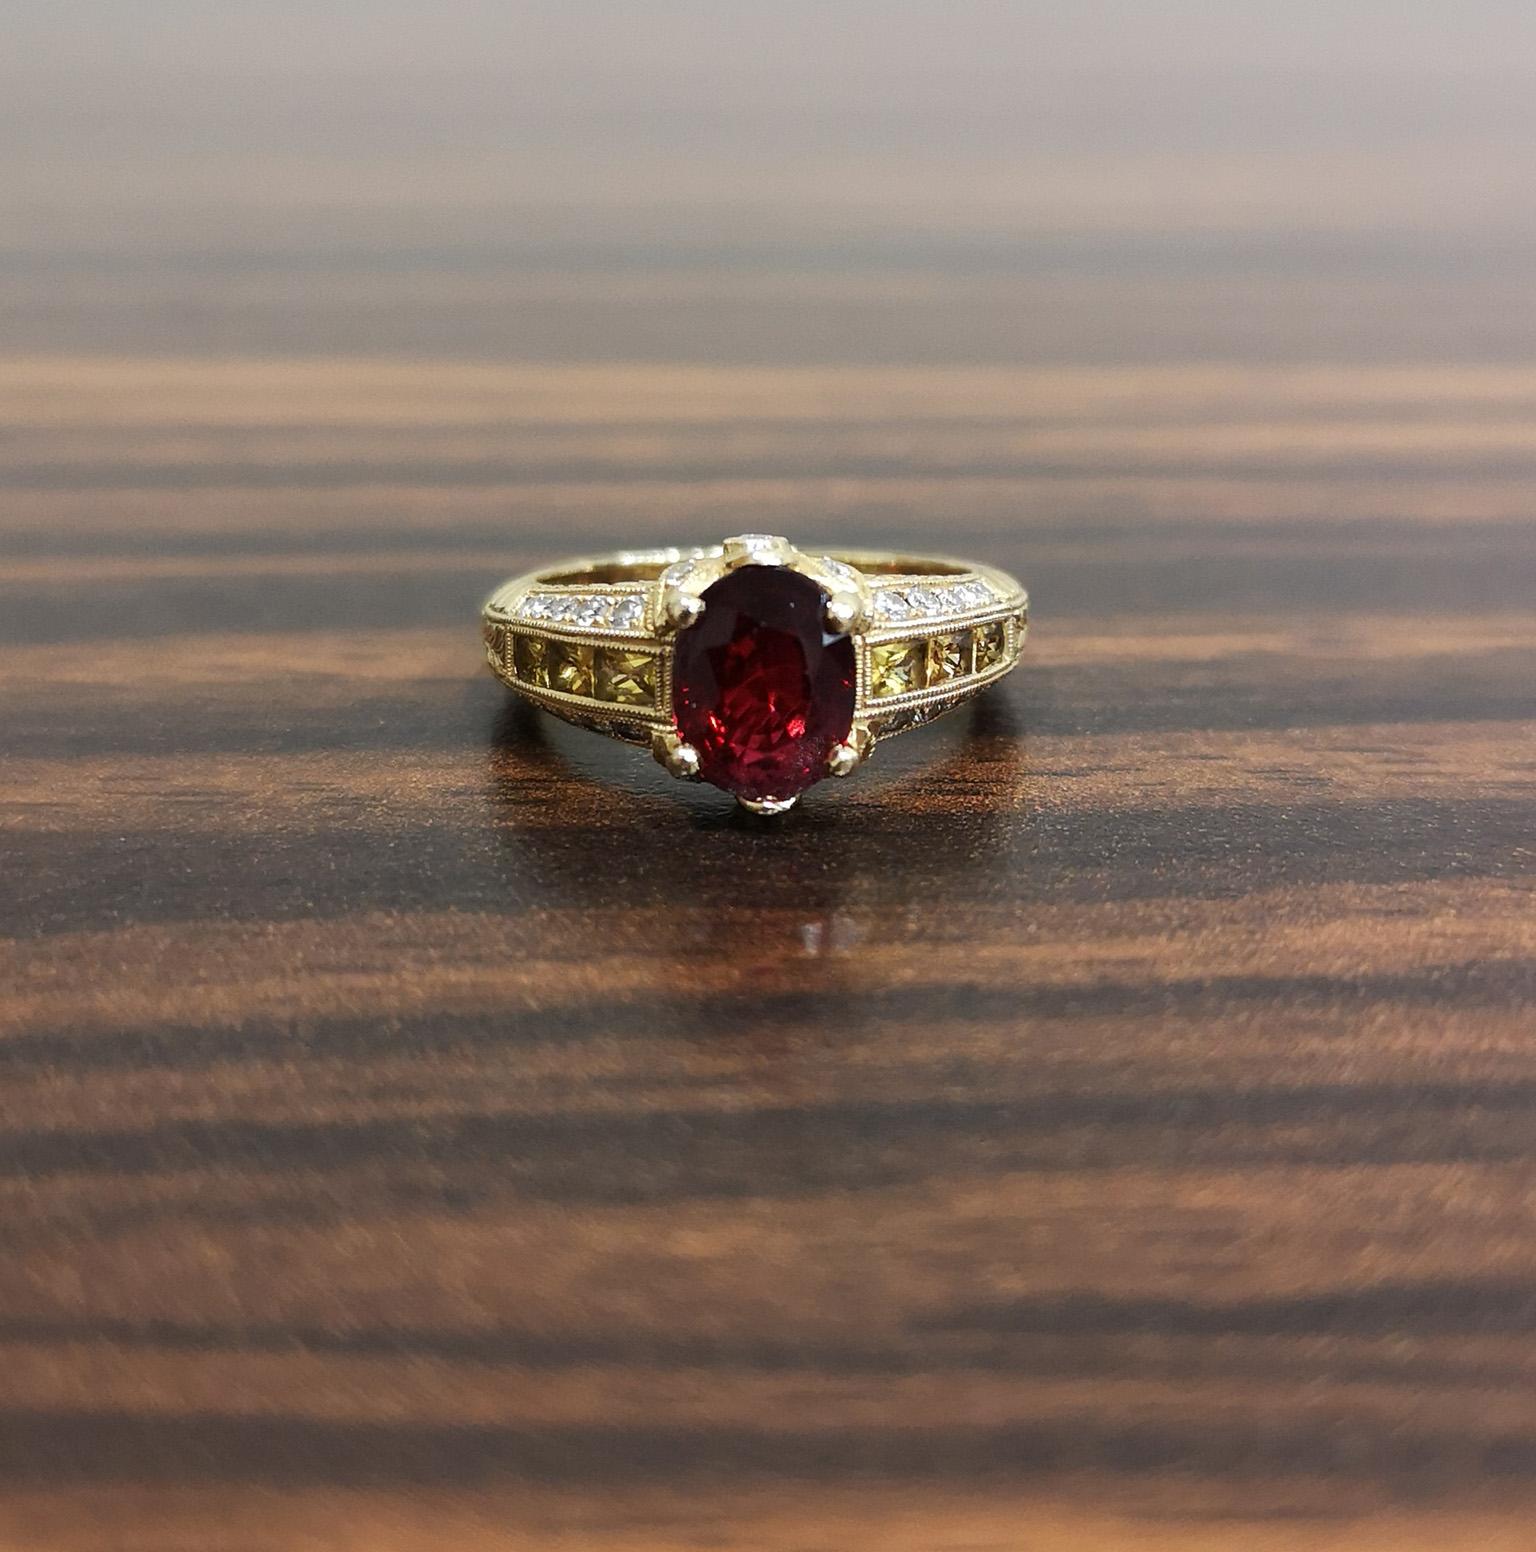 A fabulous, beautifully decorated and elaborate ring. The exceptional central red spinel of fantastic colour and fire is mounted in four claws. Flanked on either side by a channel of French-cut yellow sapphires. The gallery set with diamonds and